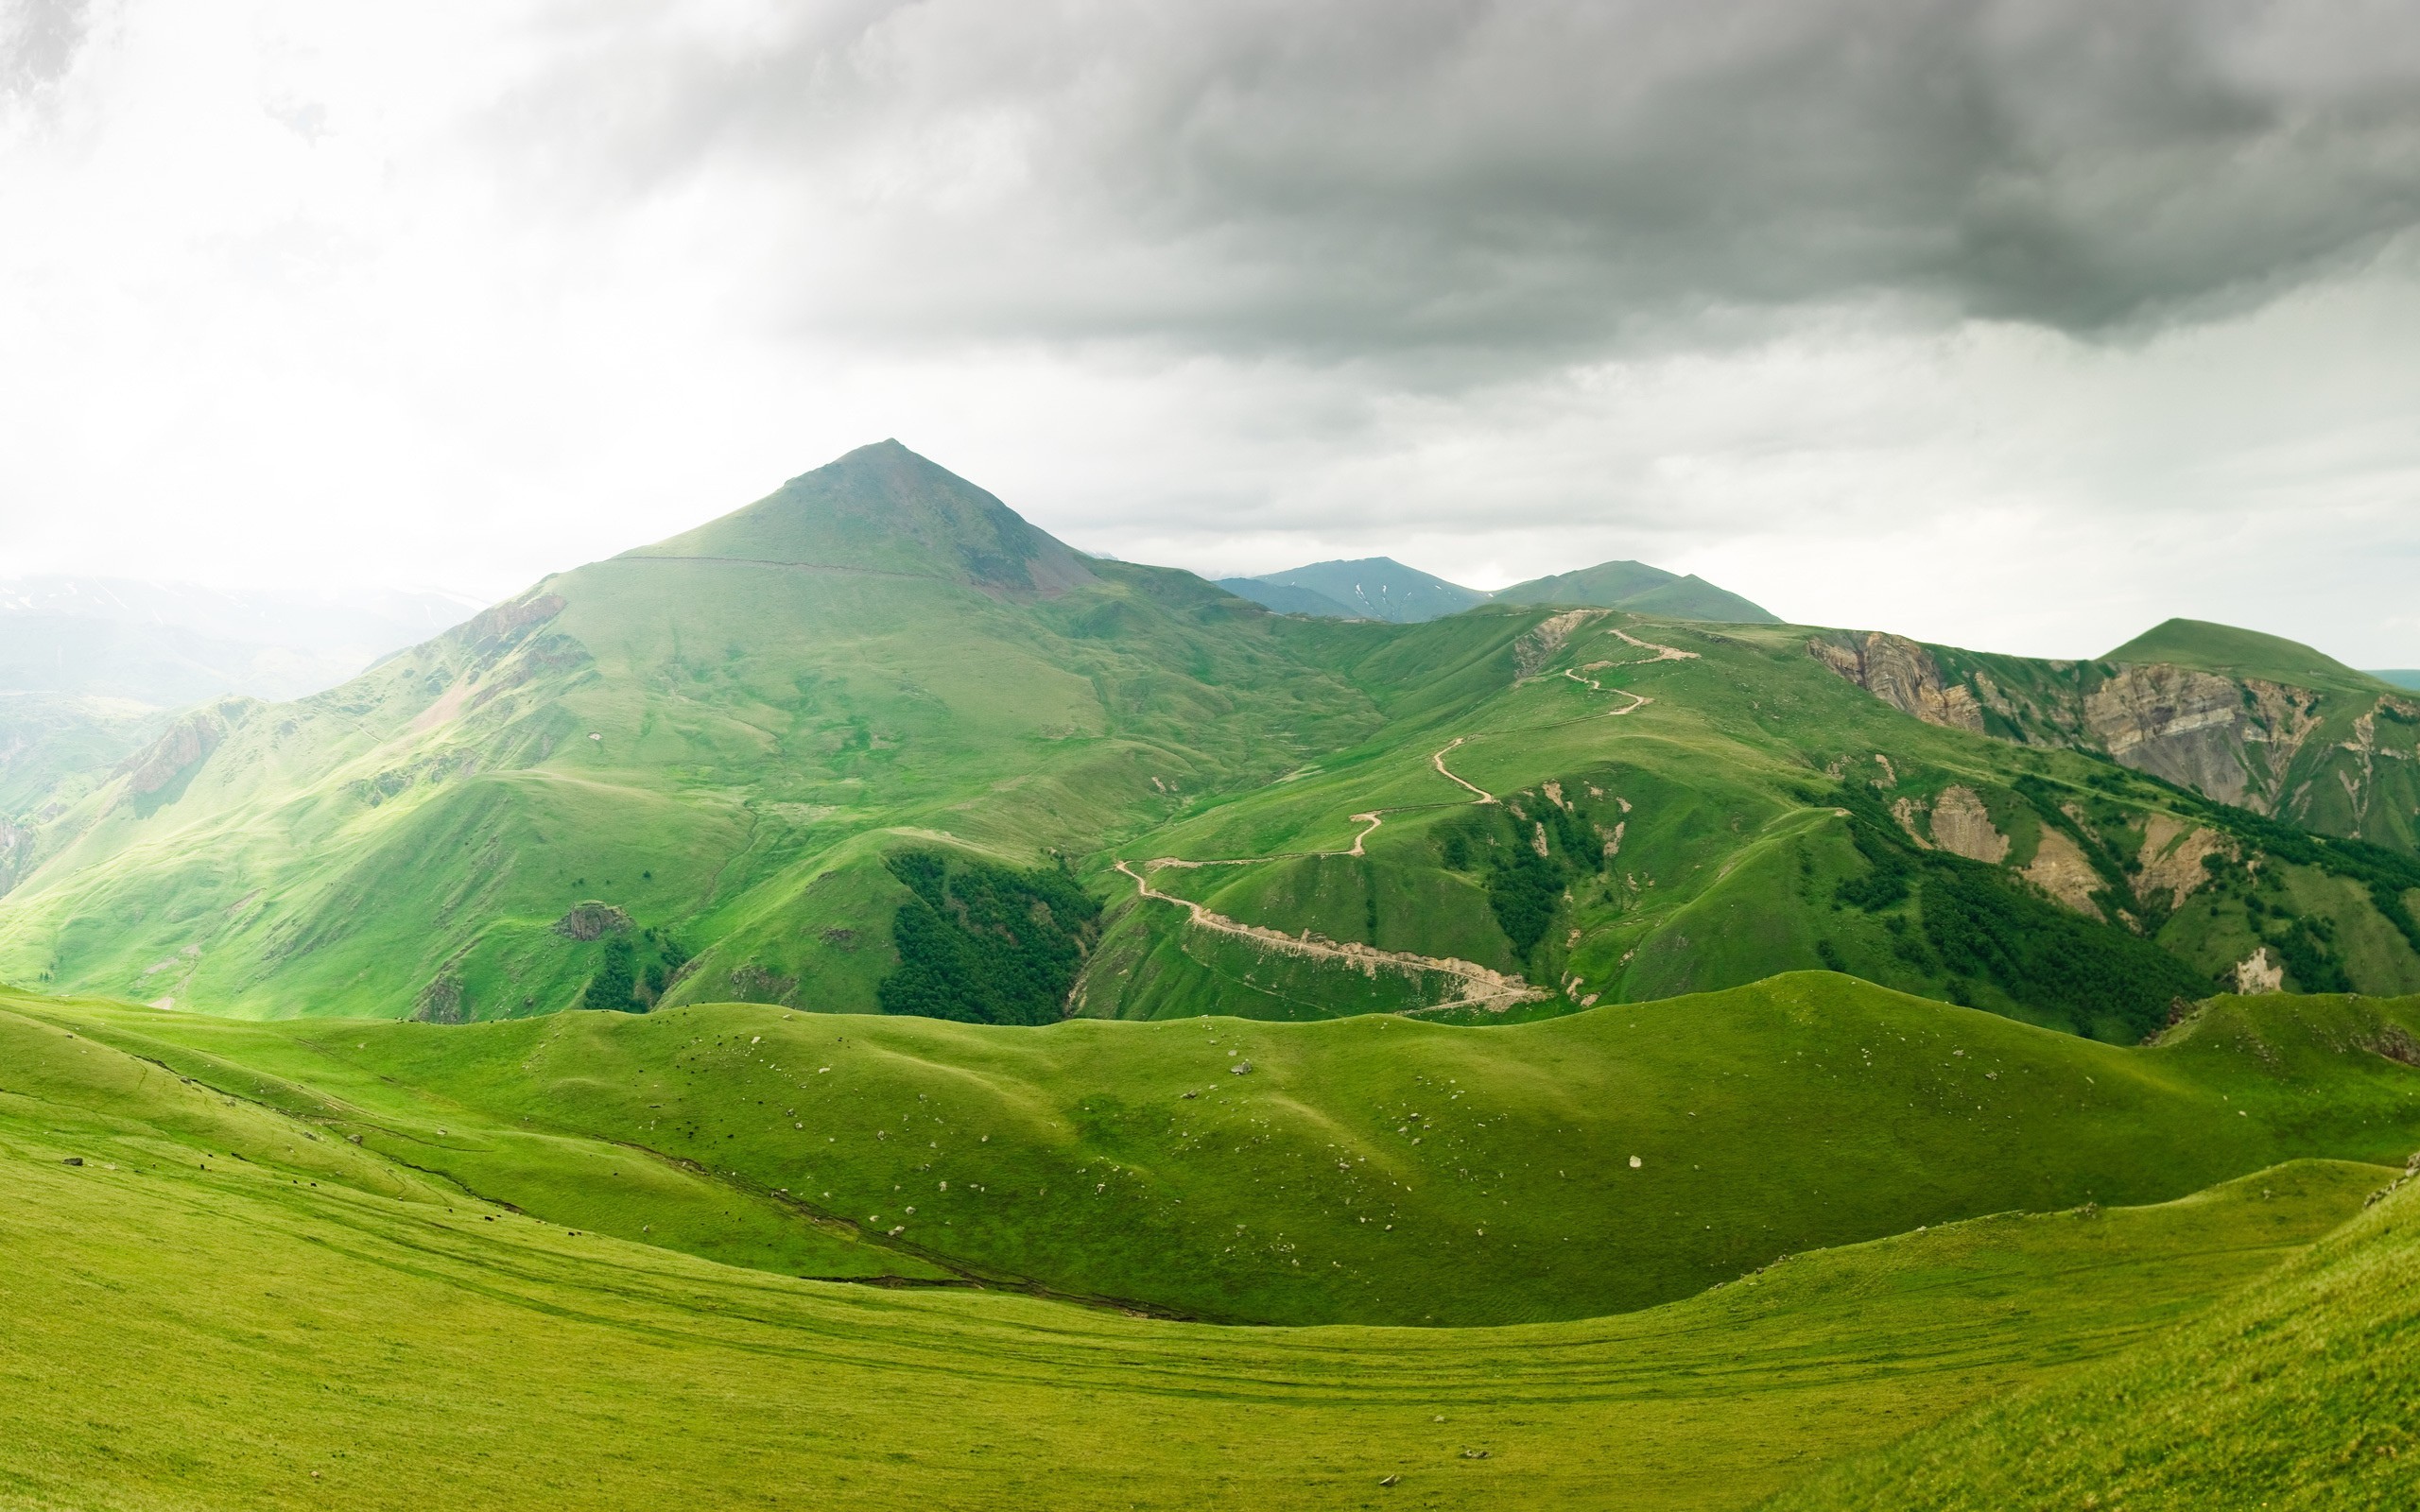 General 2560x1600 landscape mountains green nature